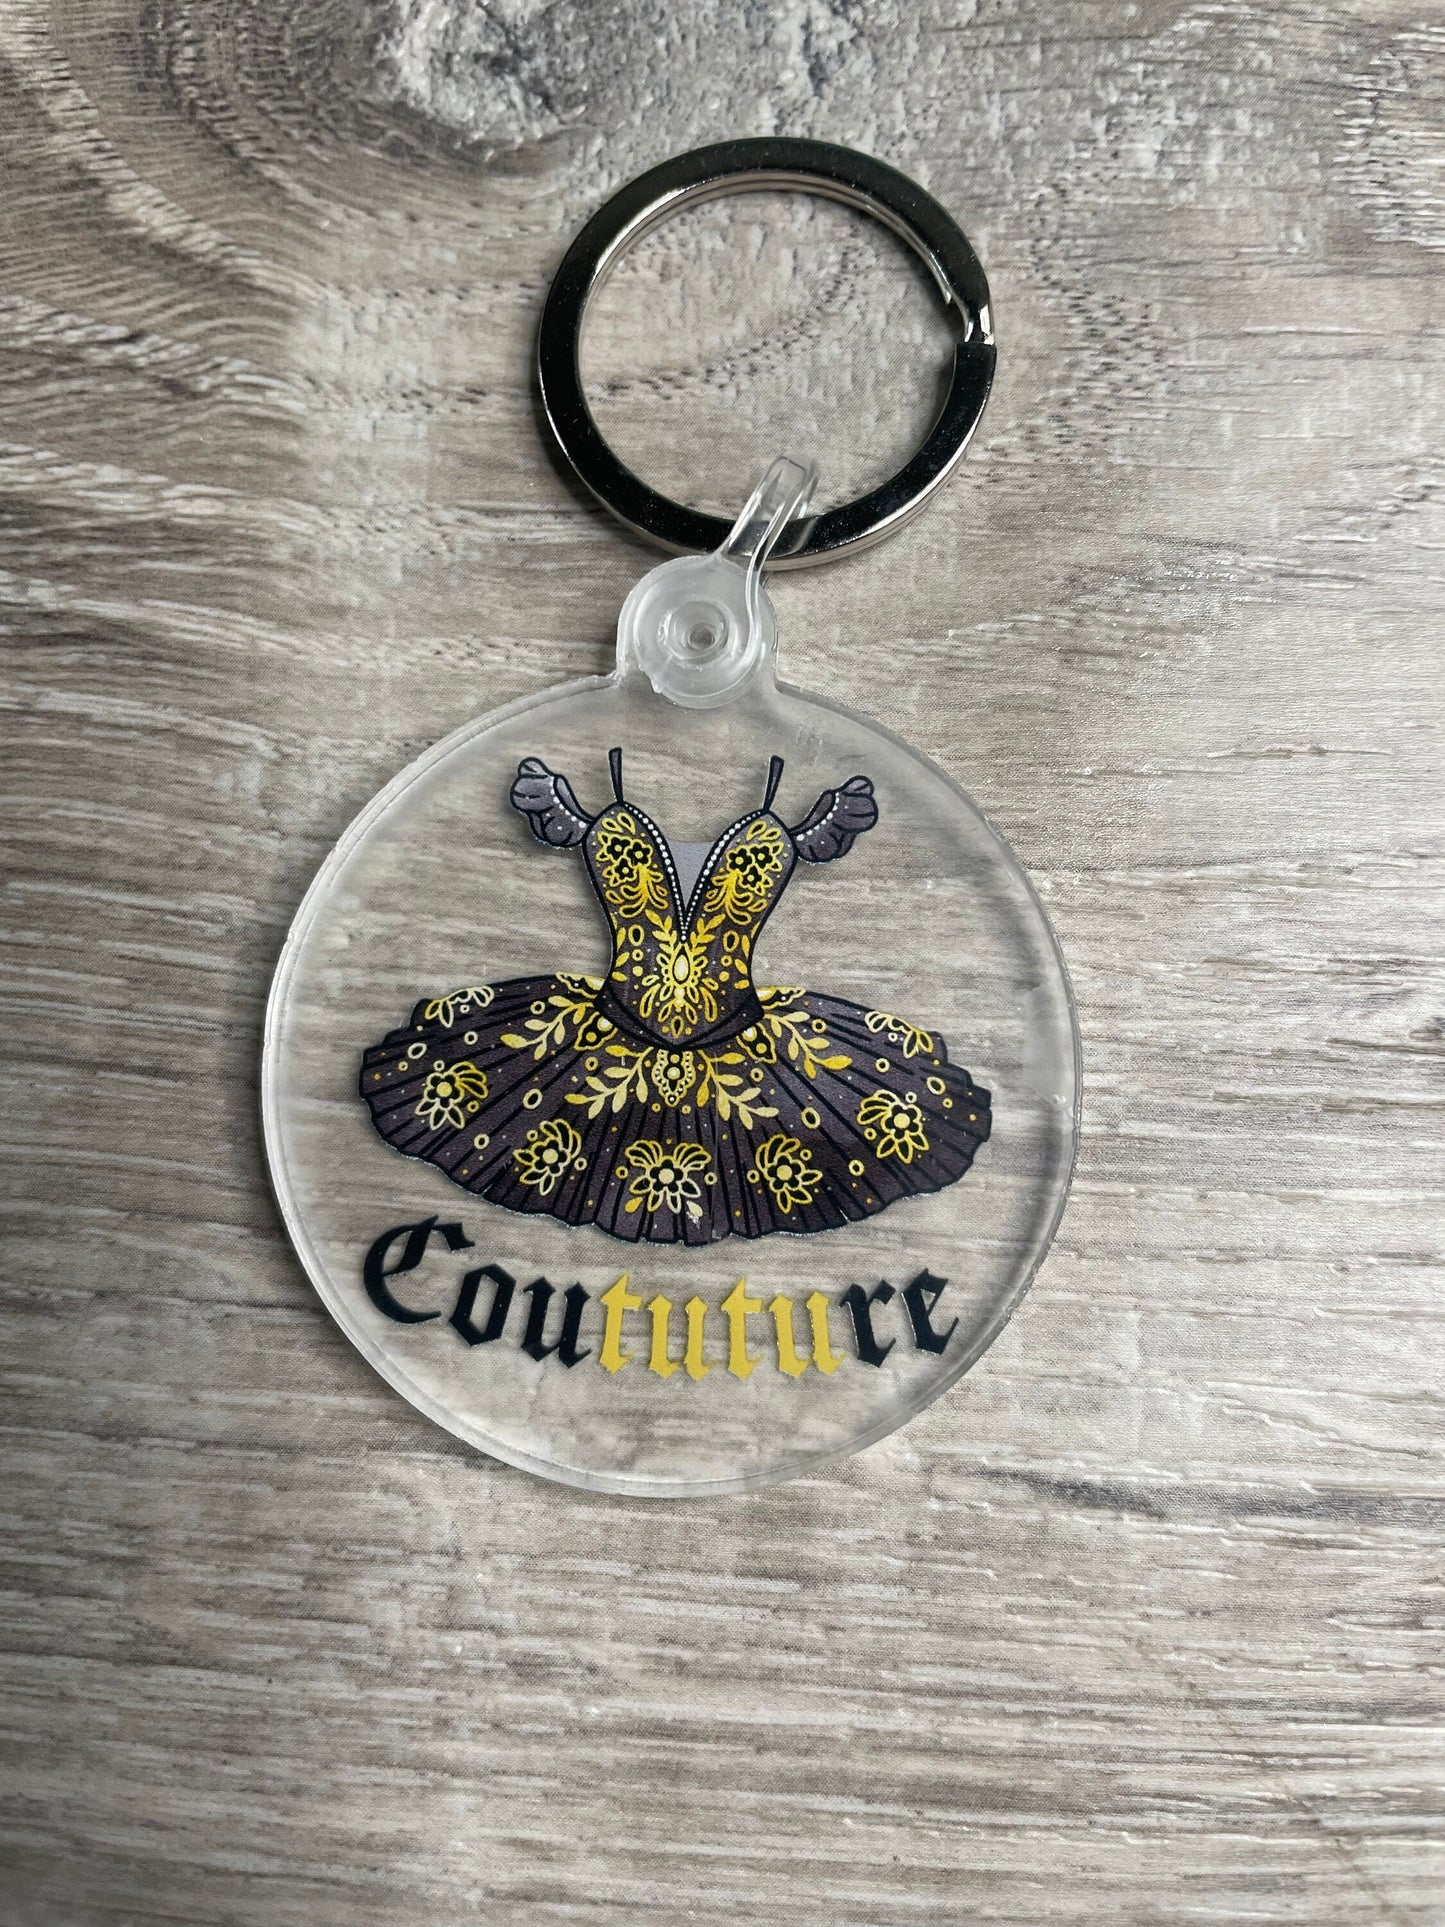 Coututure Acrylic Key Chain, Dance Gift